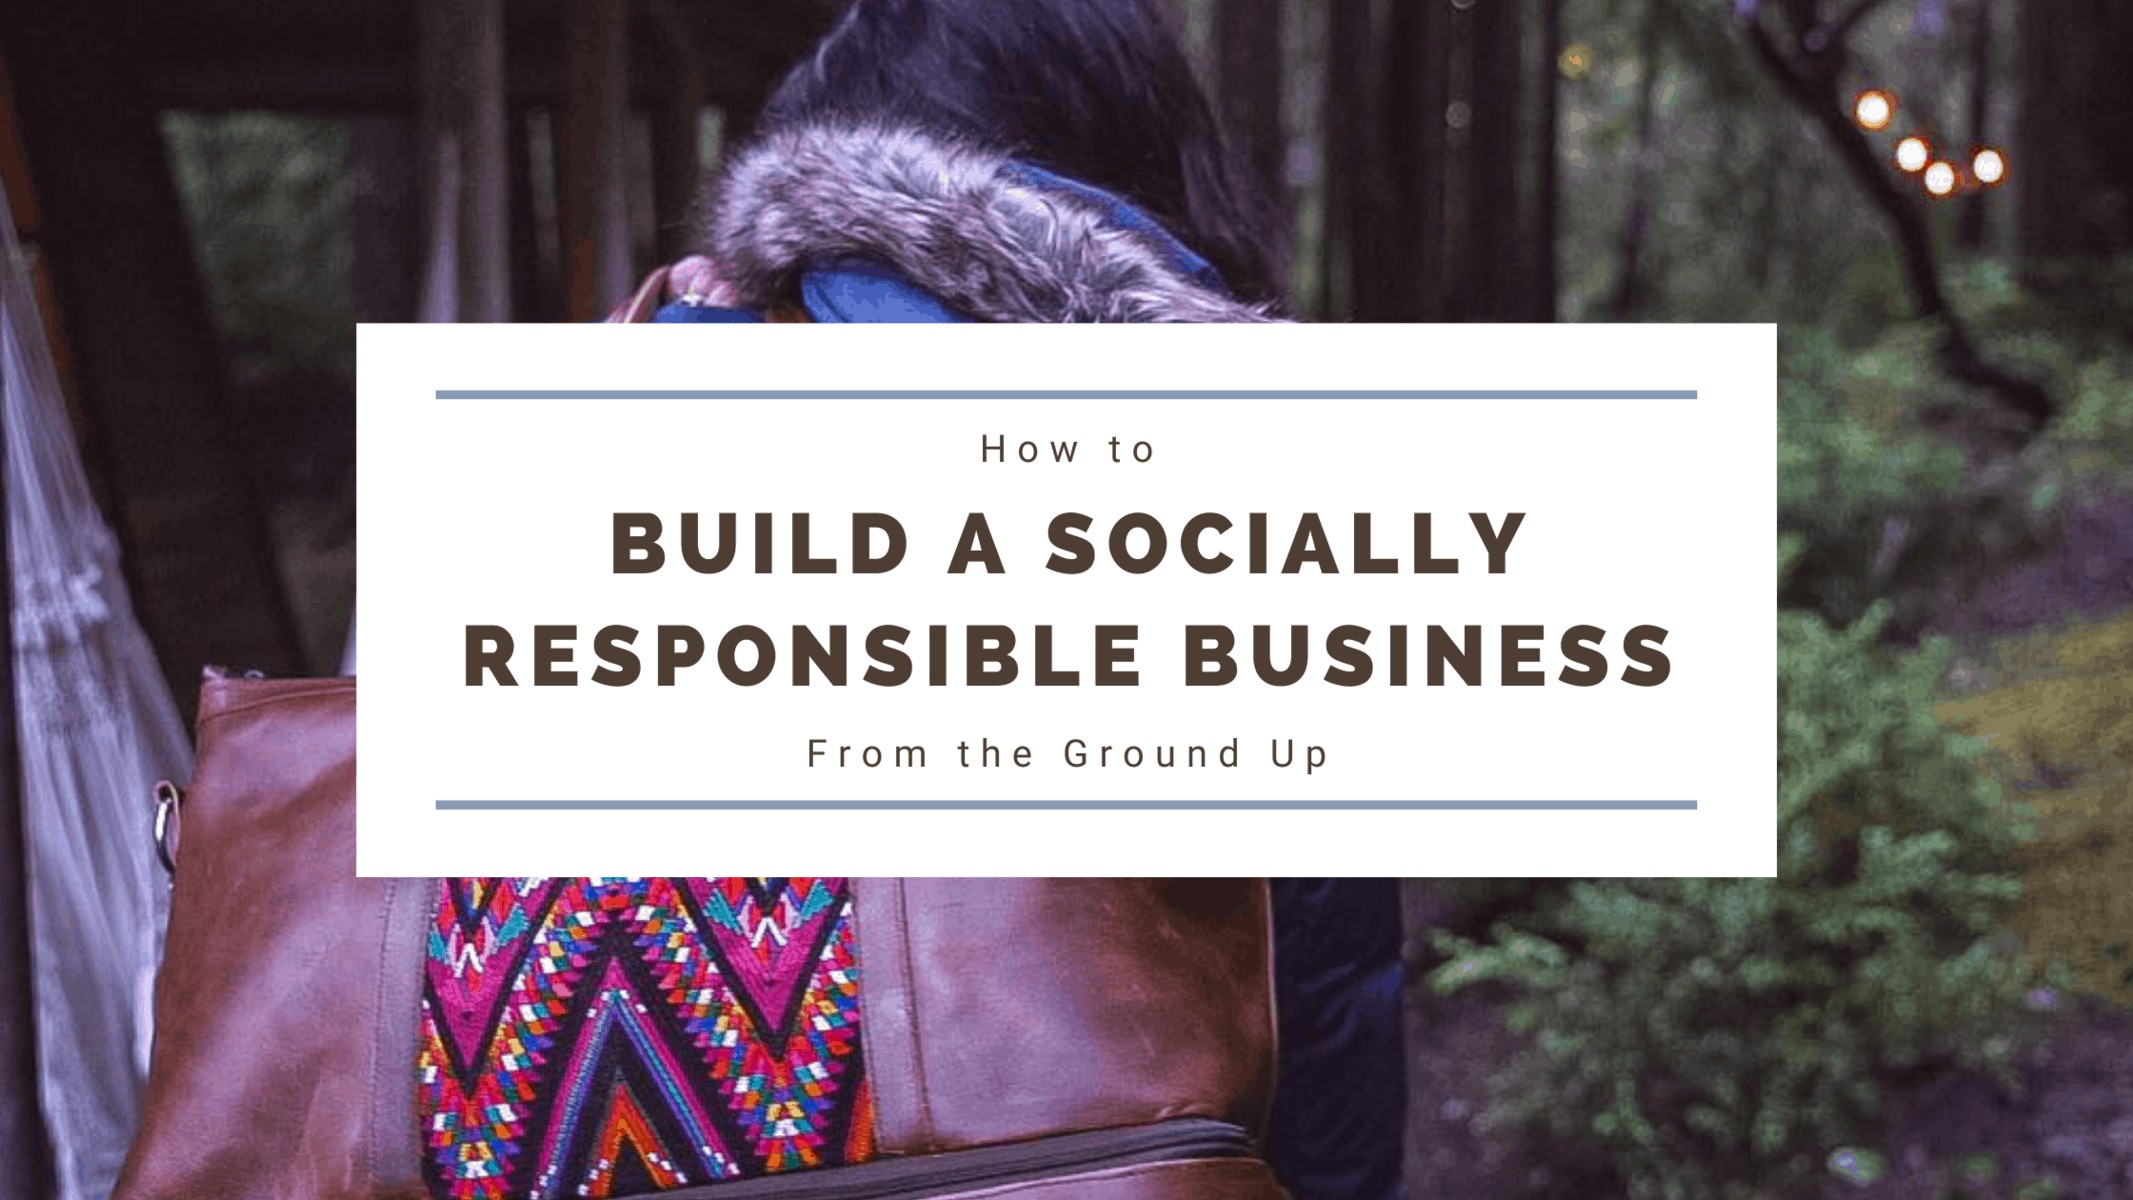 How to Build a Socially Responsible Business